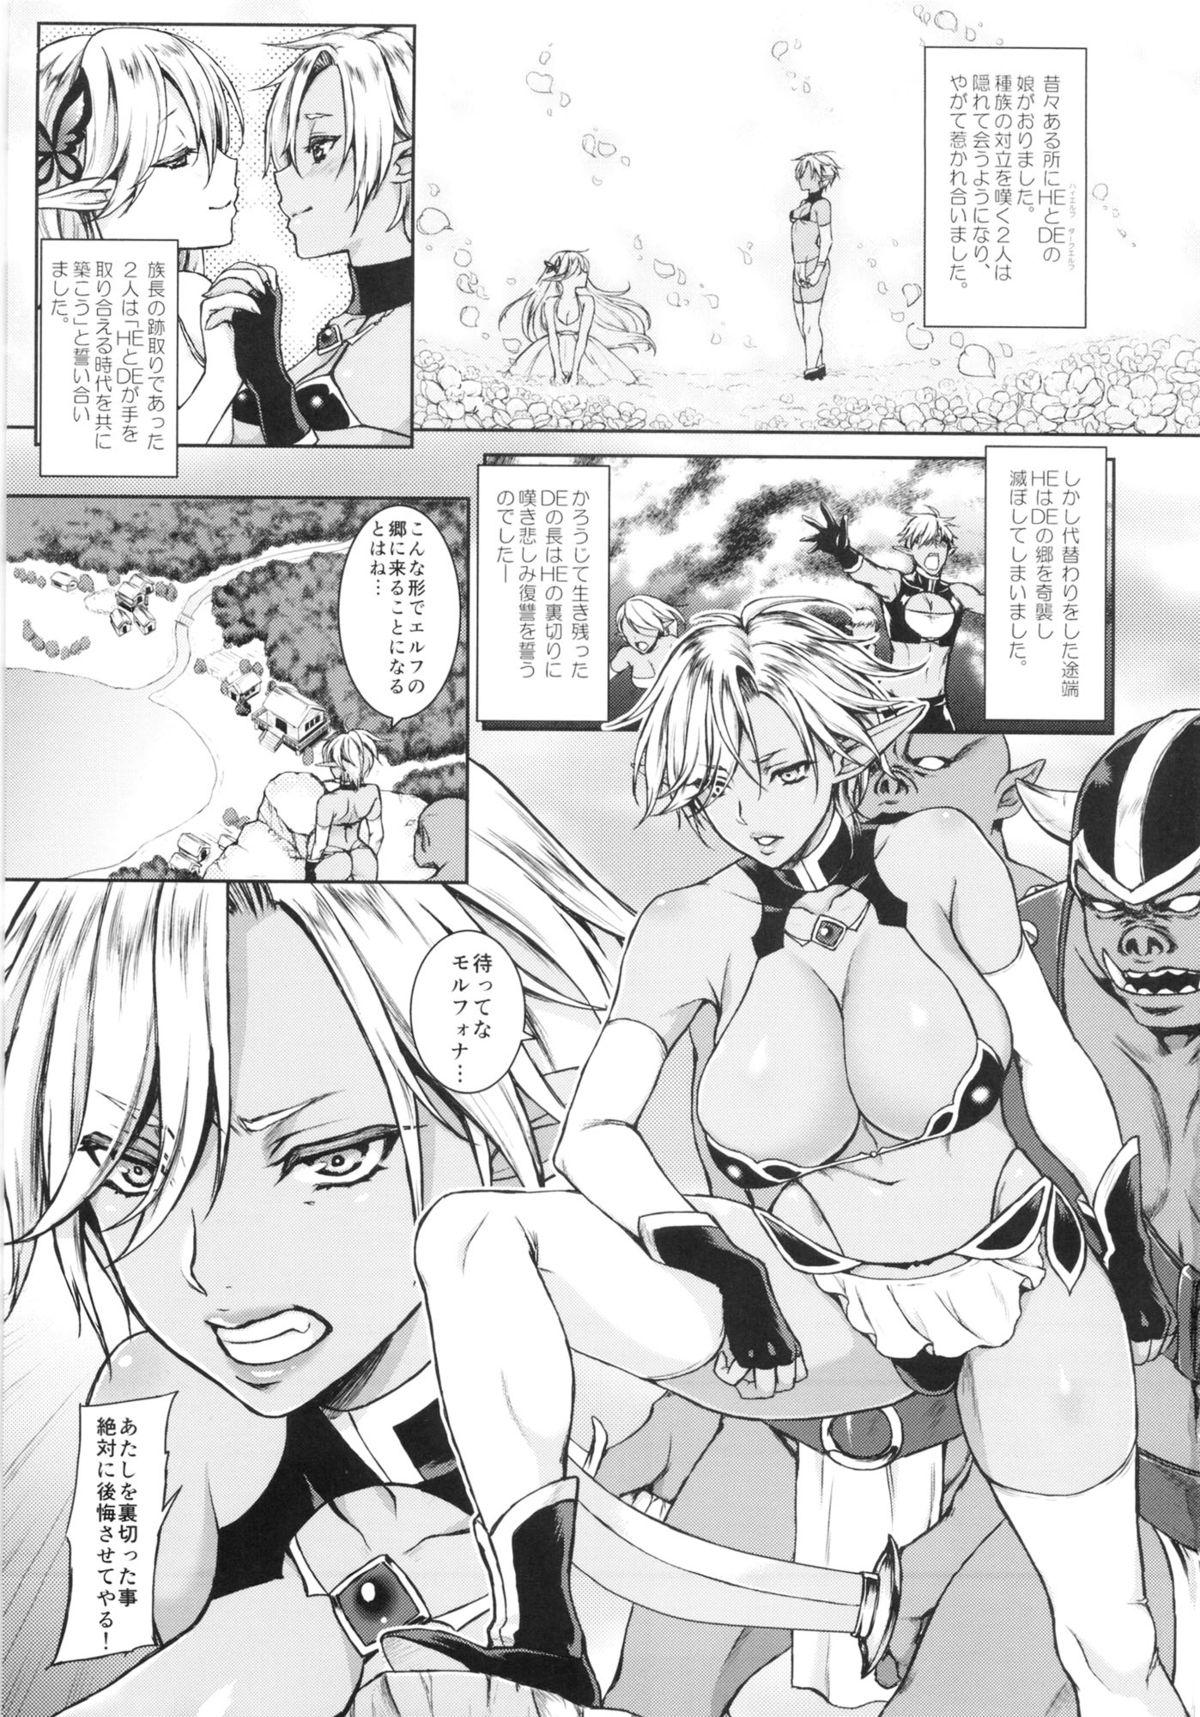 Gostoso Kyouchou no Yume - The dream of mad morpho butterflies. Doublepenetration - Page 2